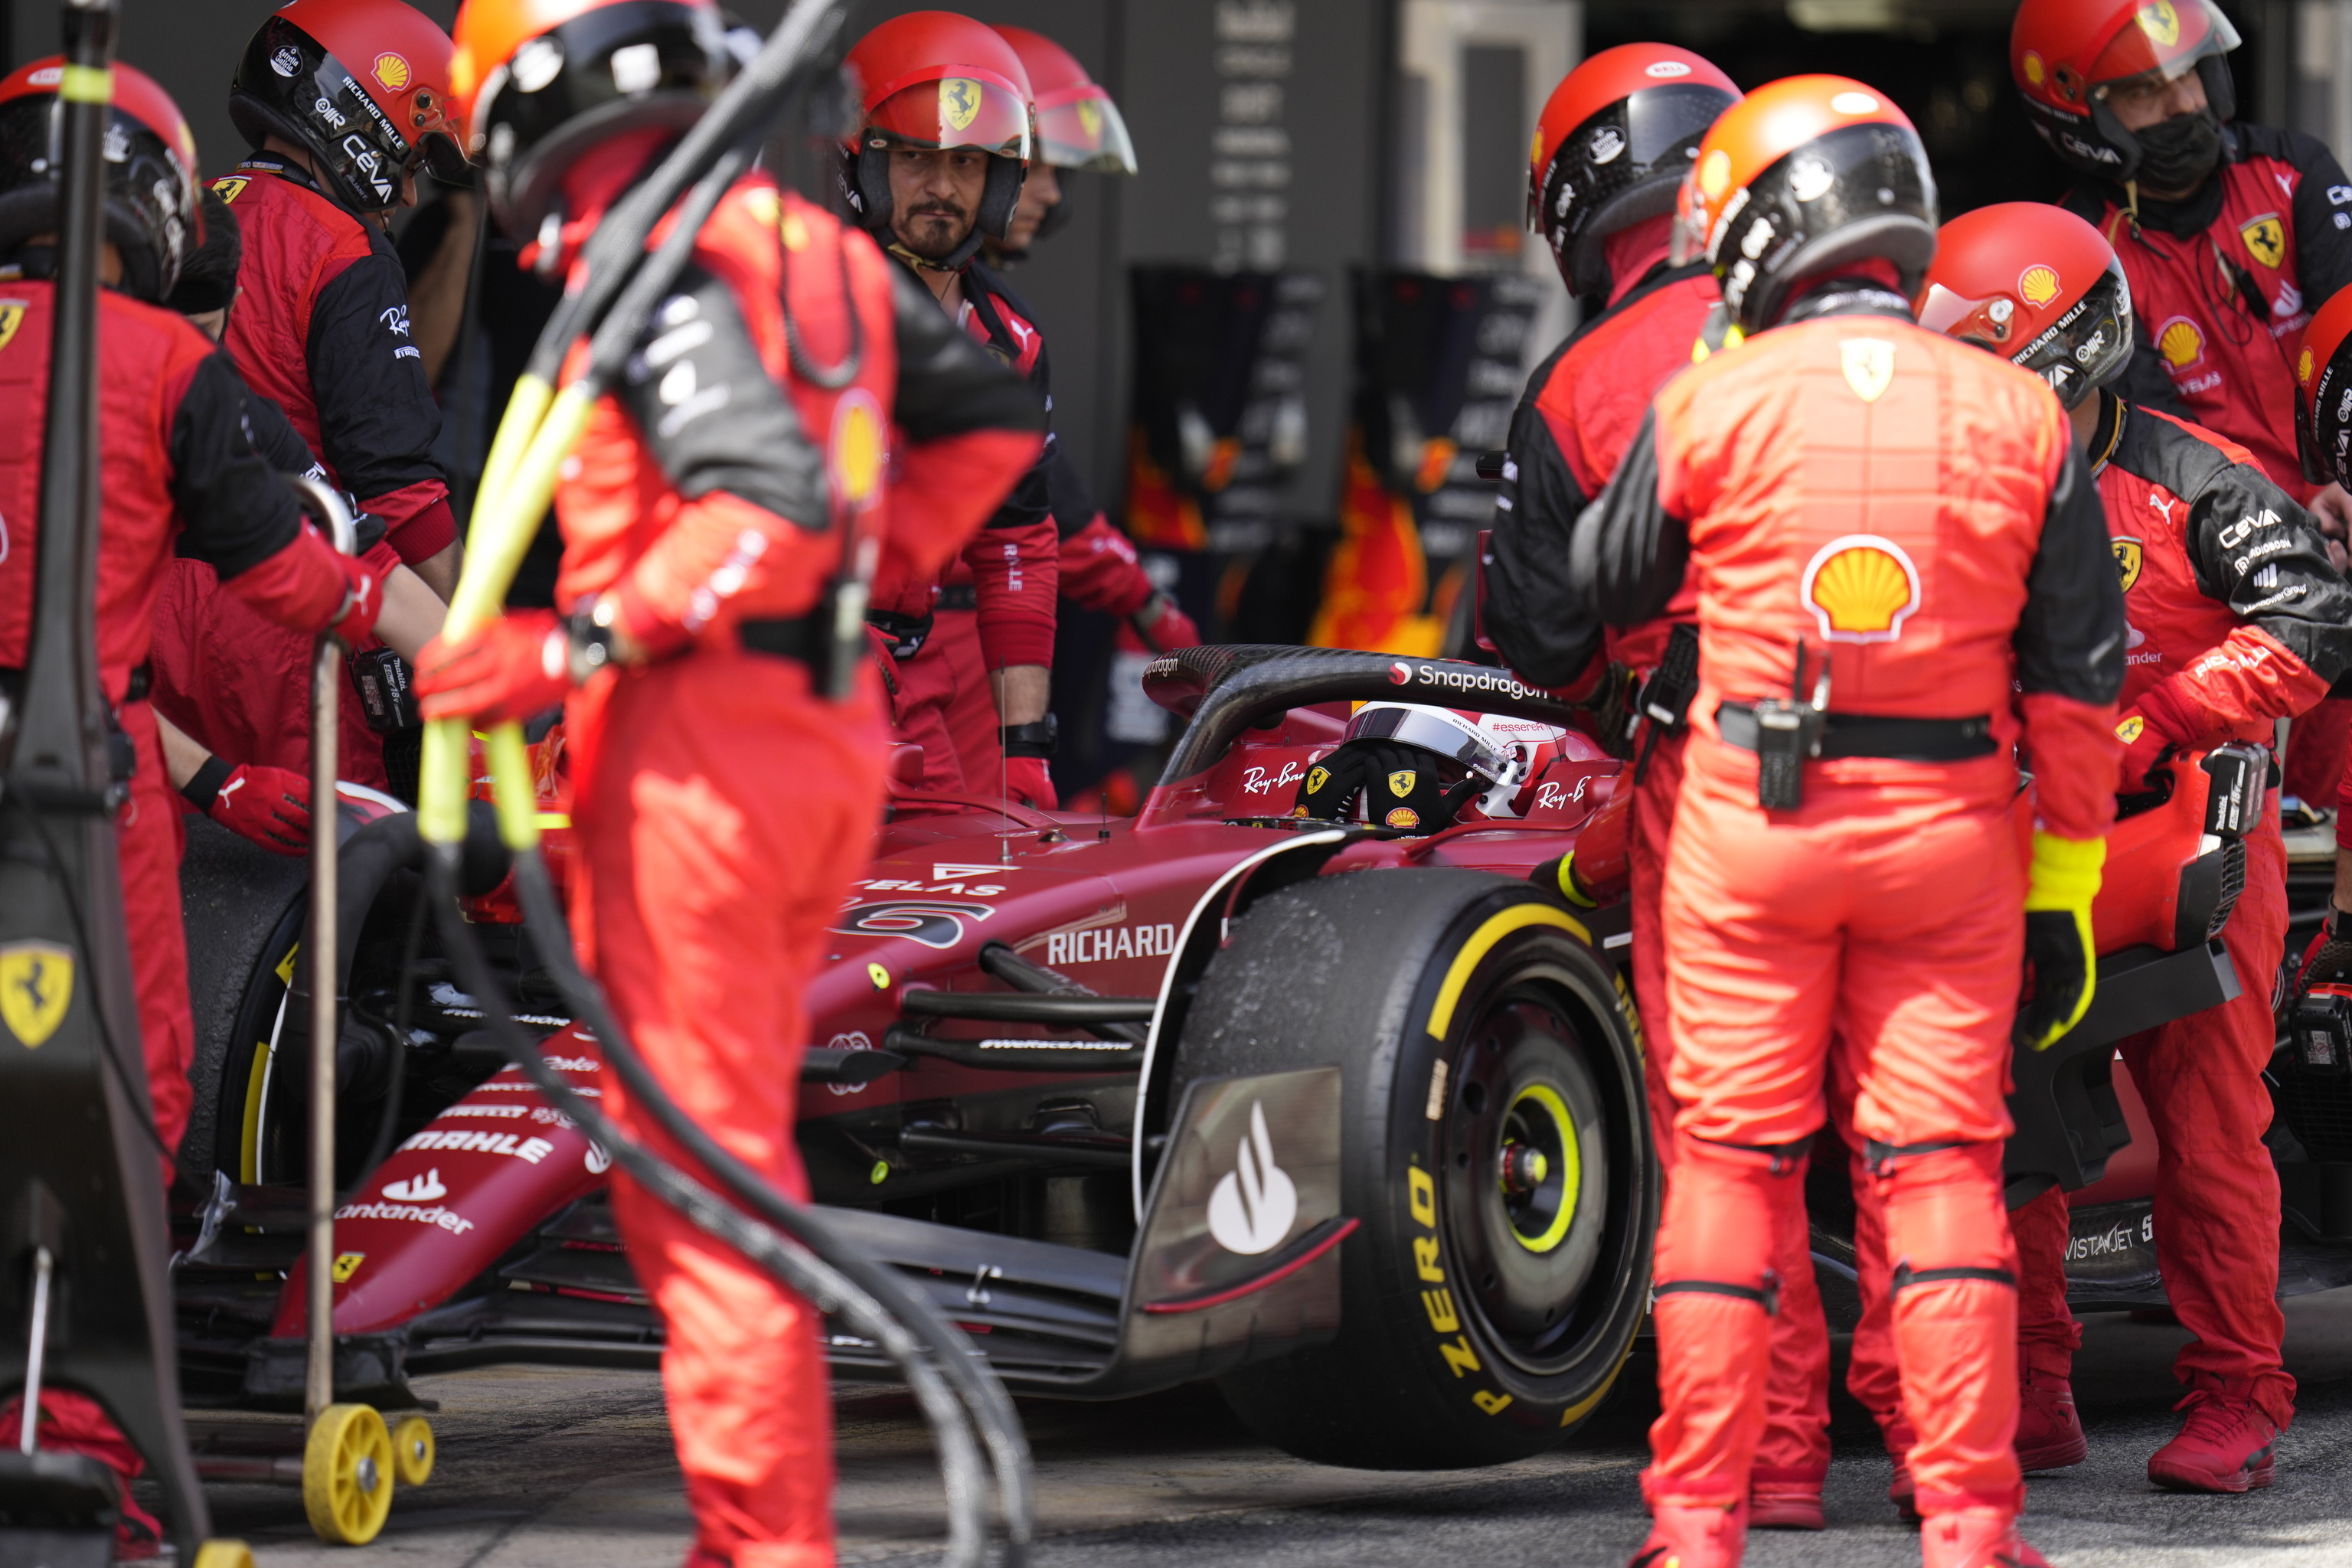 Leclerc, on his return to the pits, after an engine breakdown at Montmelo.